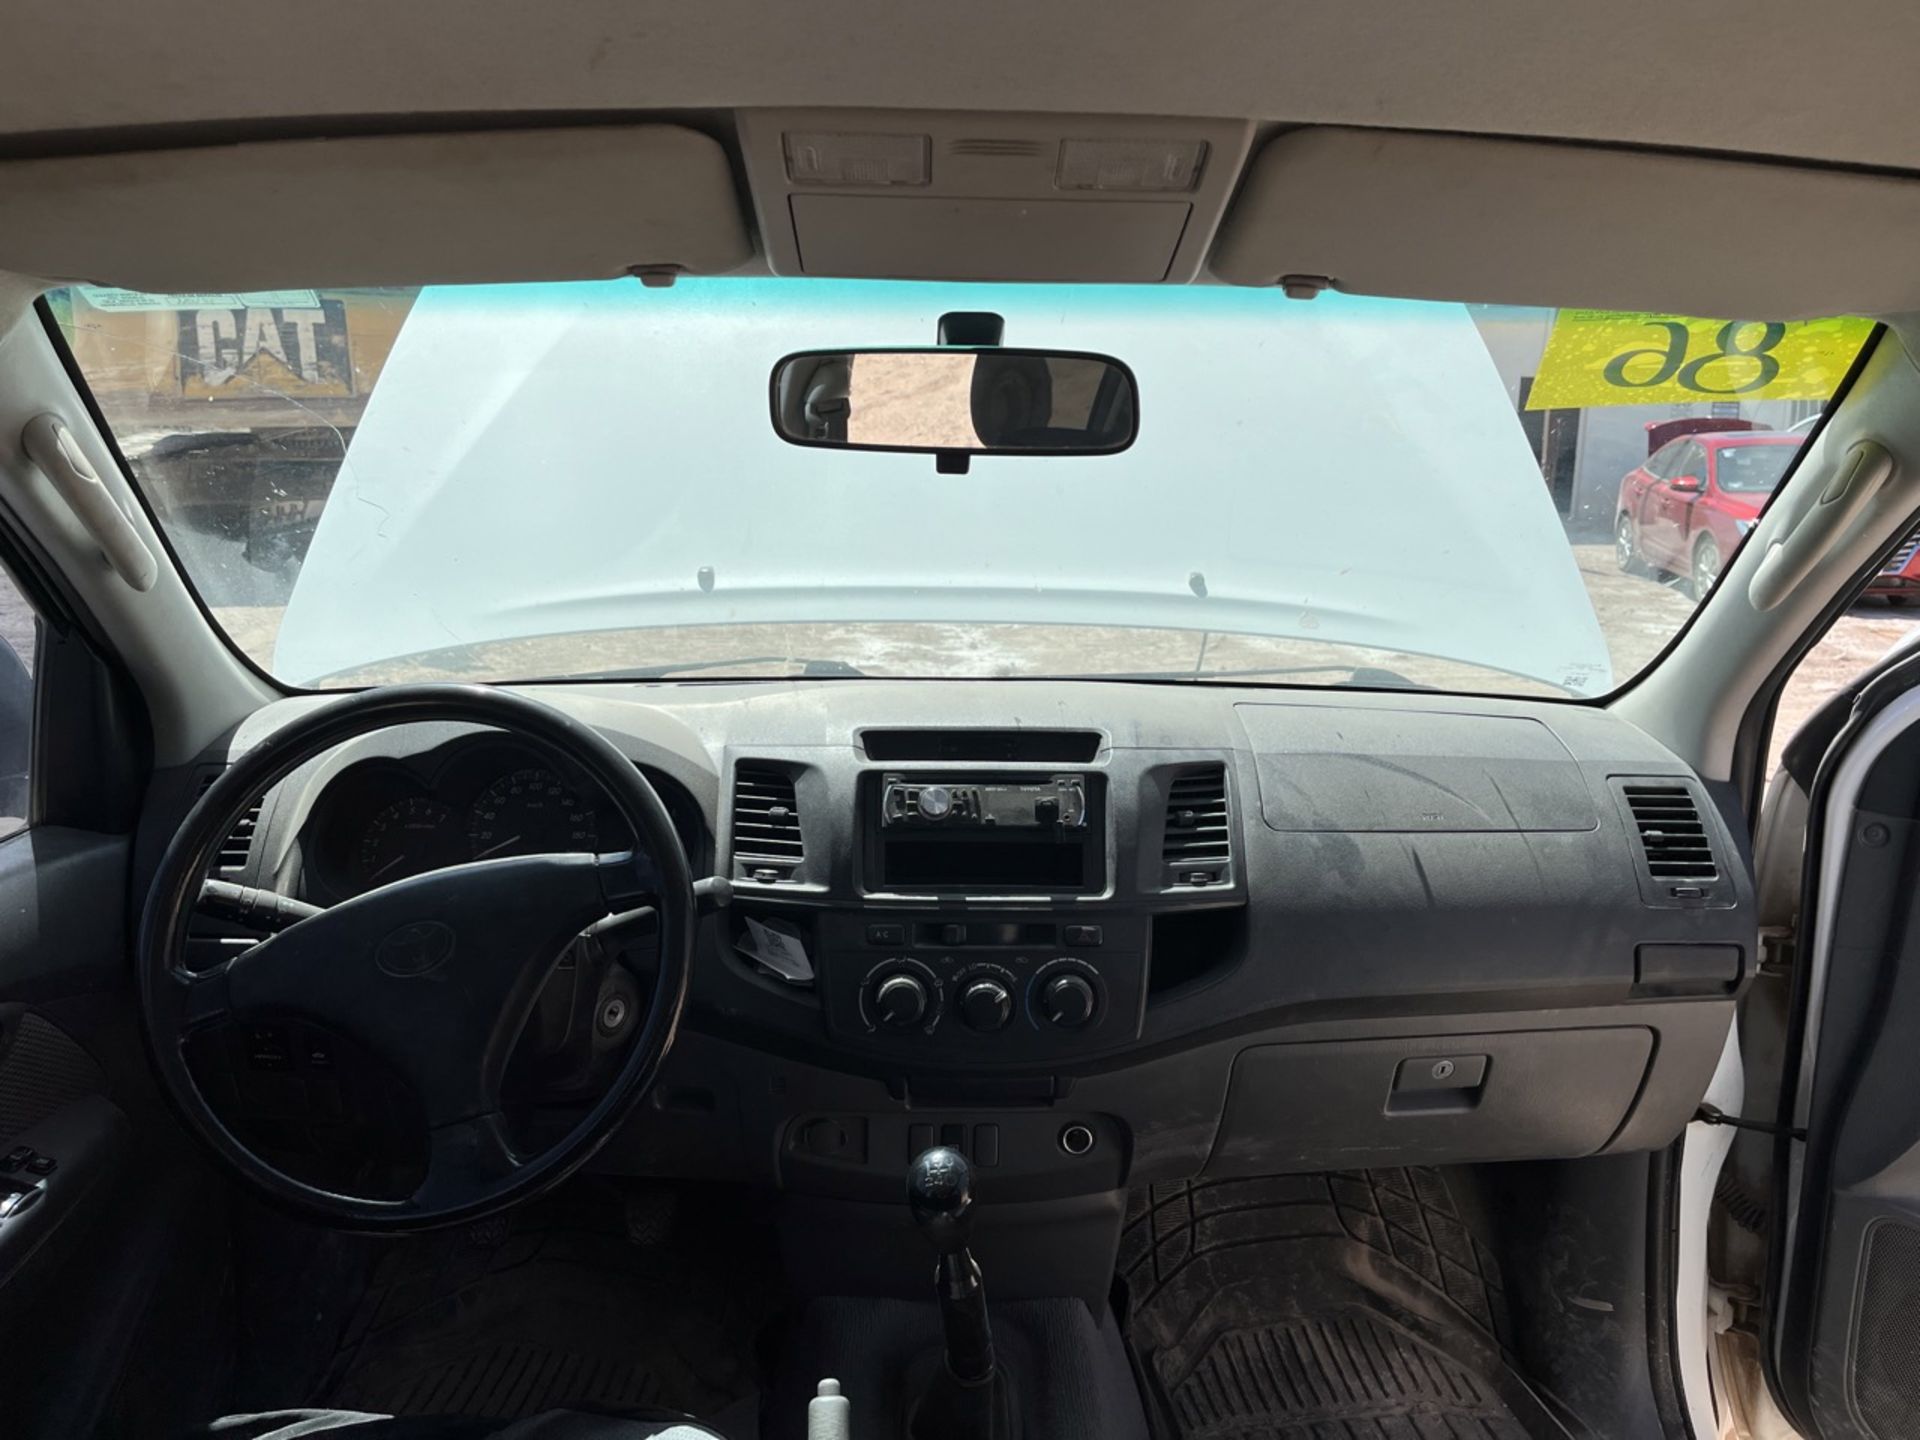 Vehicle Toyota Hilux, Pick Up Double cab white color, Serial MR0EX32G9F0263336, Model 2015, manual - Image 16 of 42